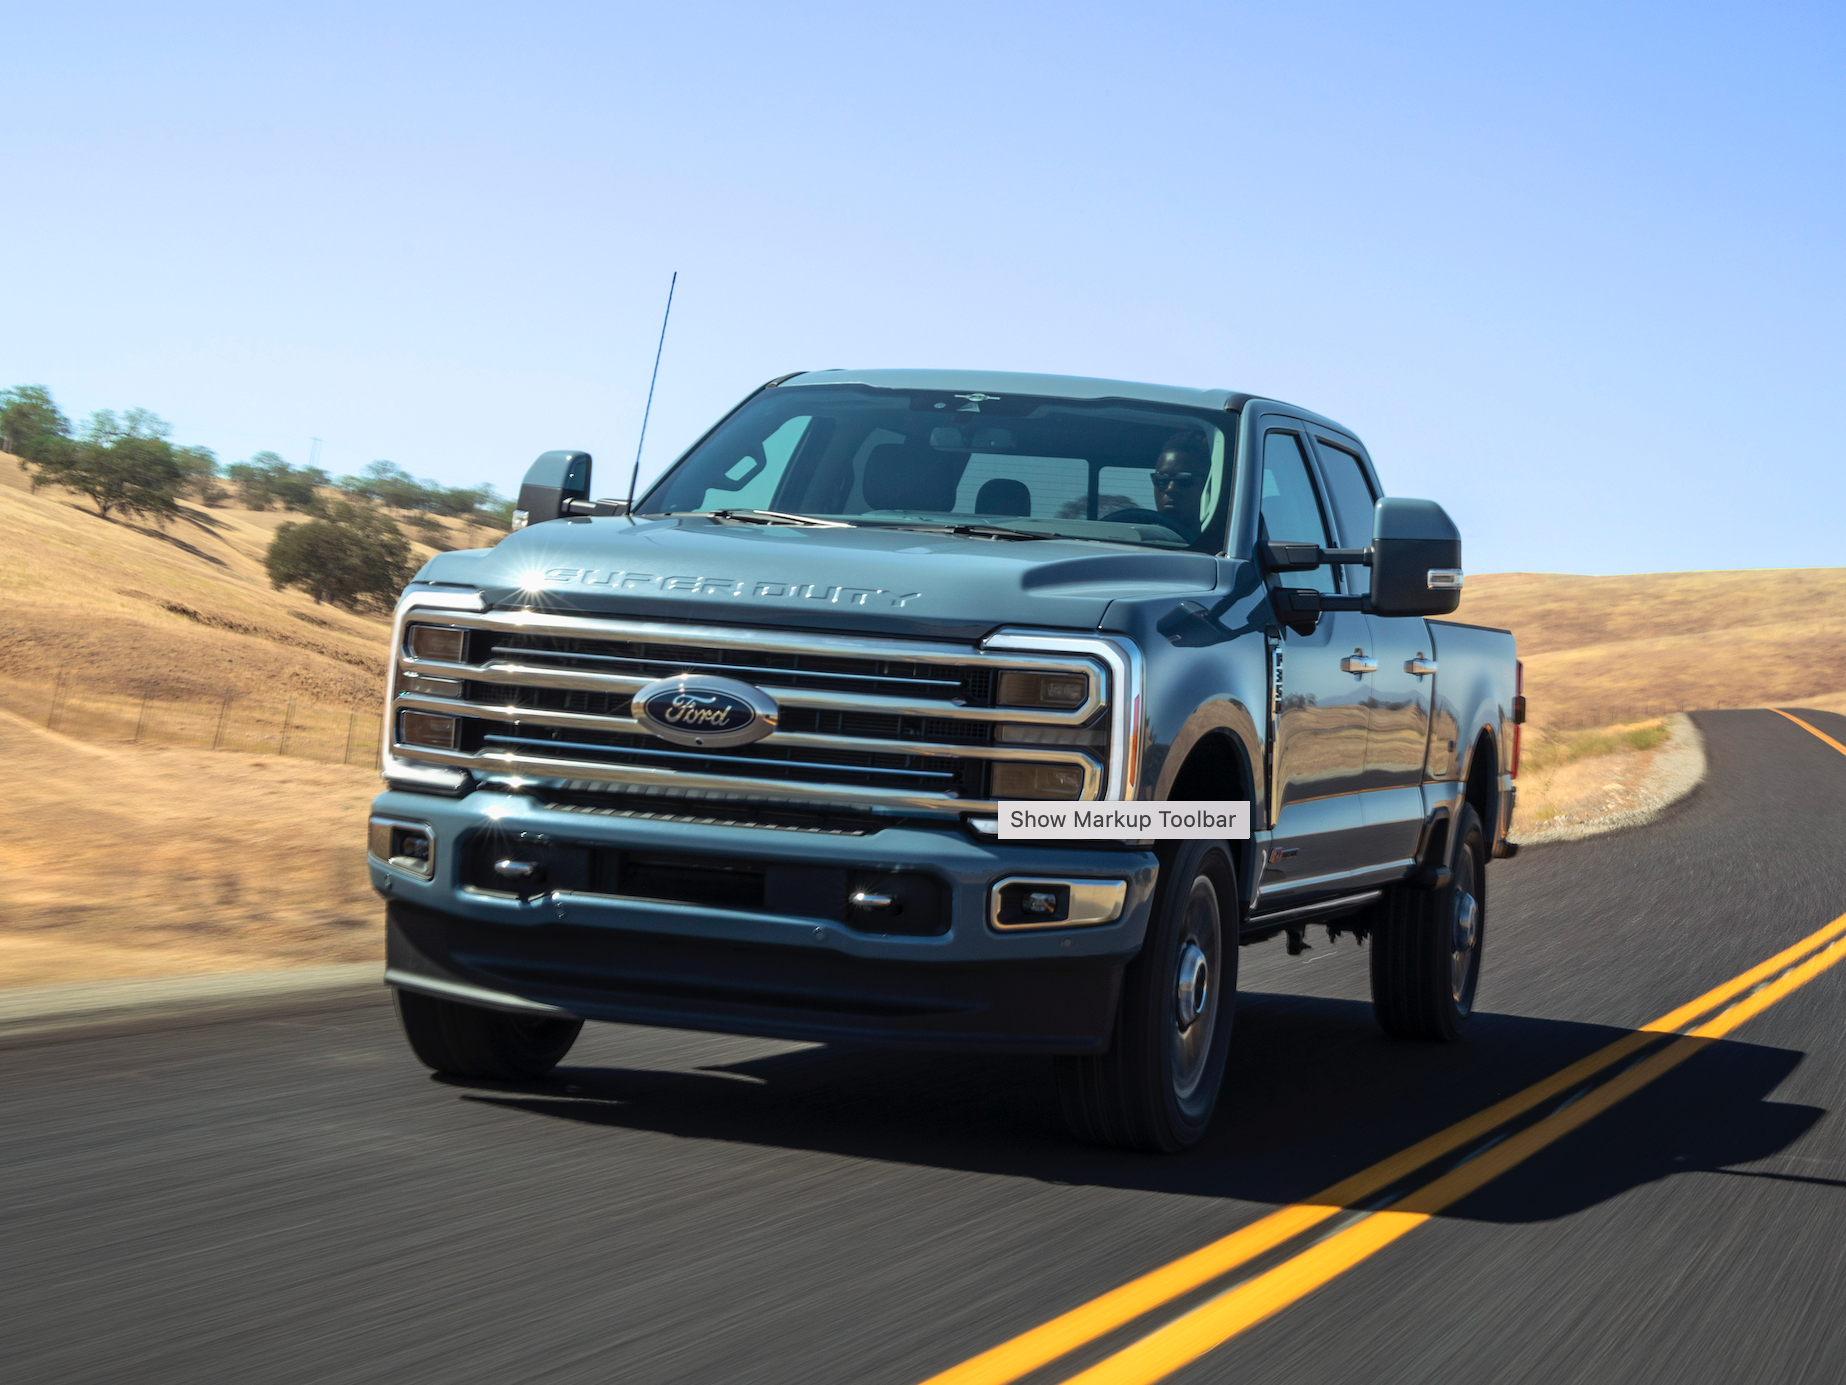 Ford Super Duty truck series uses mostly Windsor-built engines